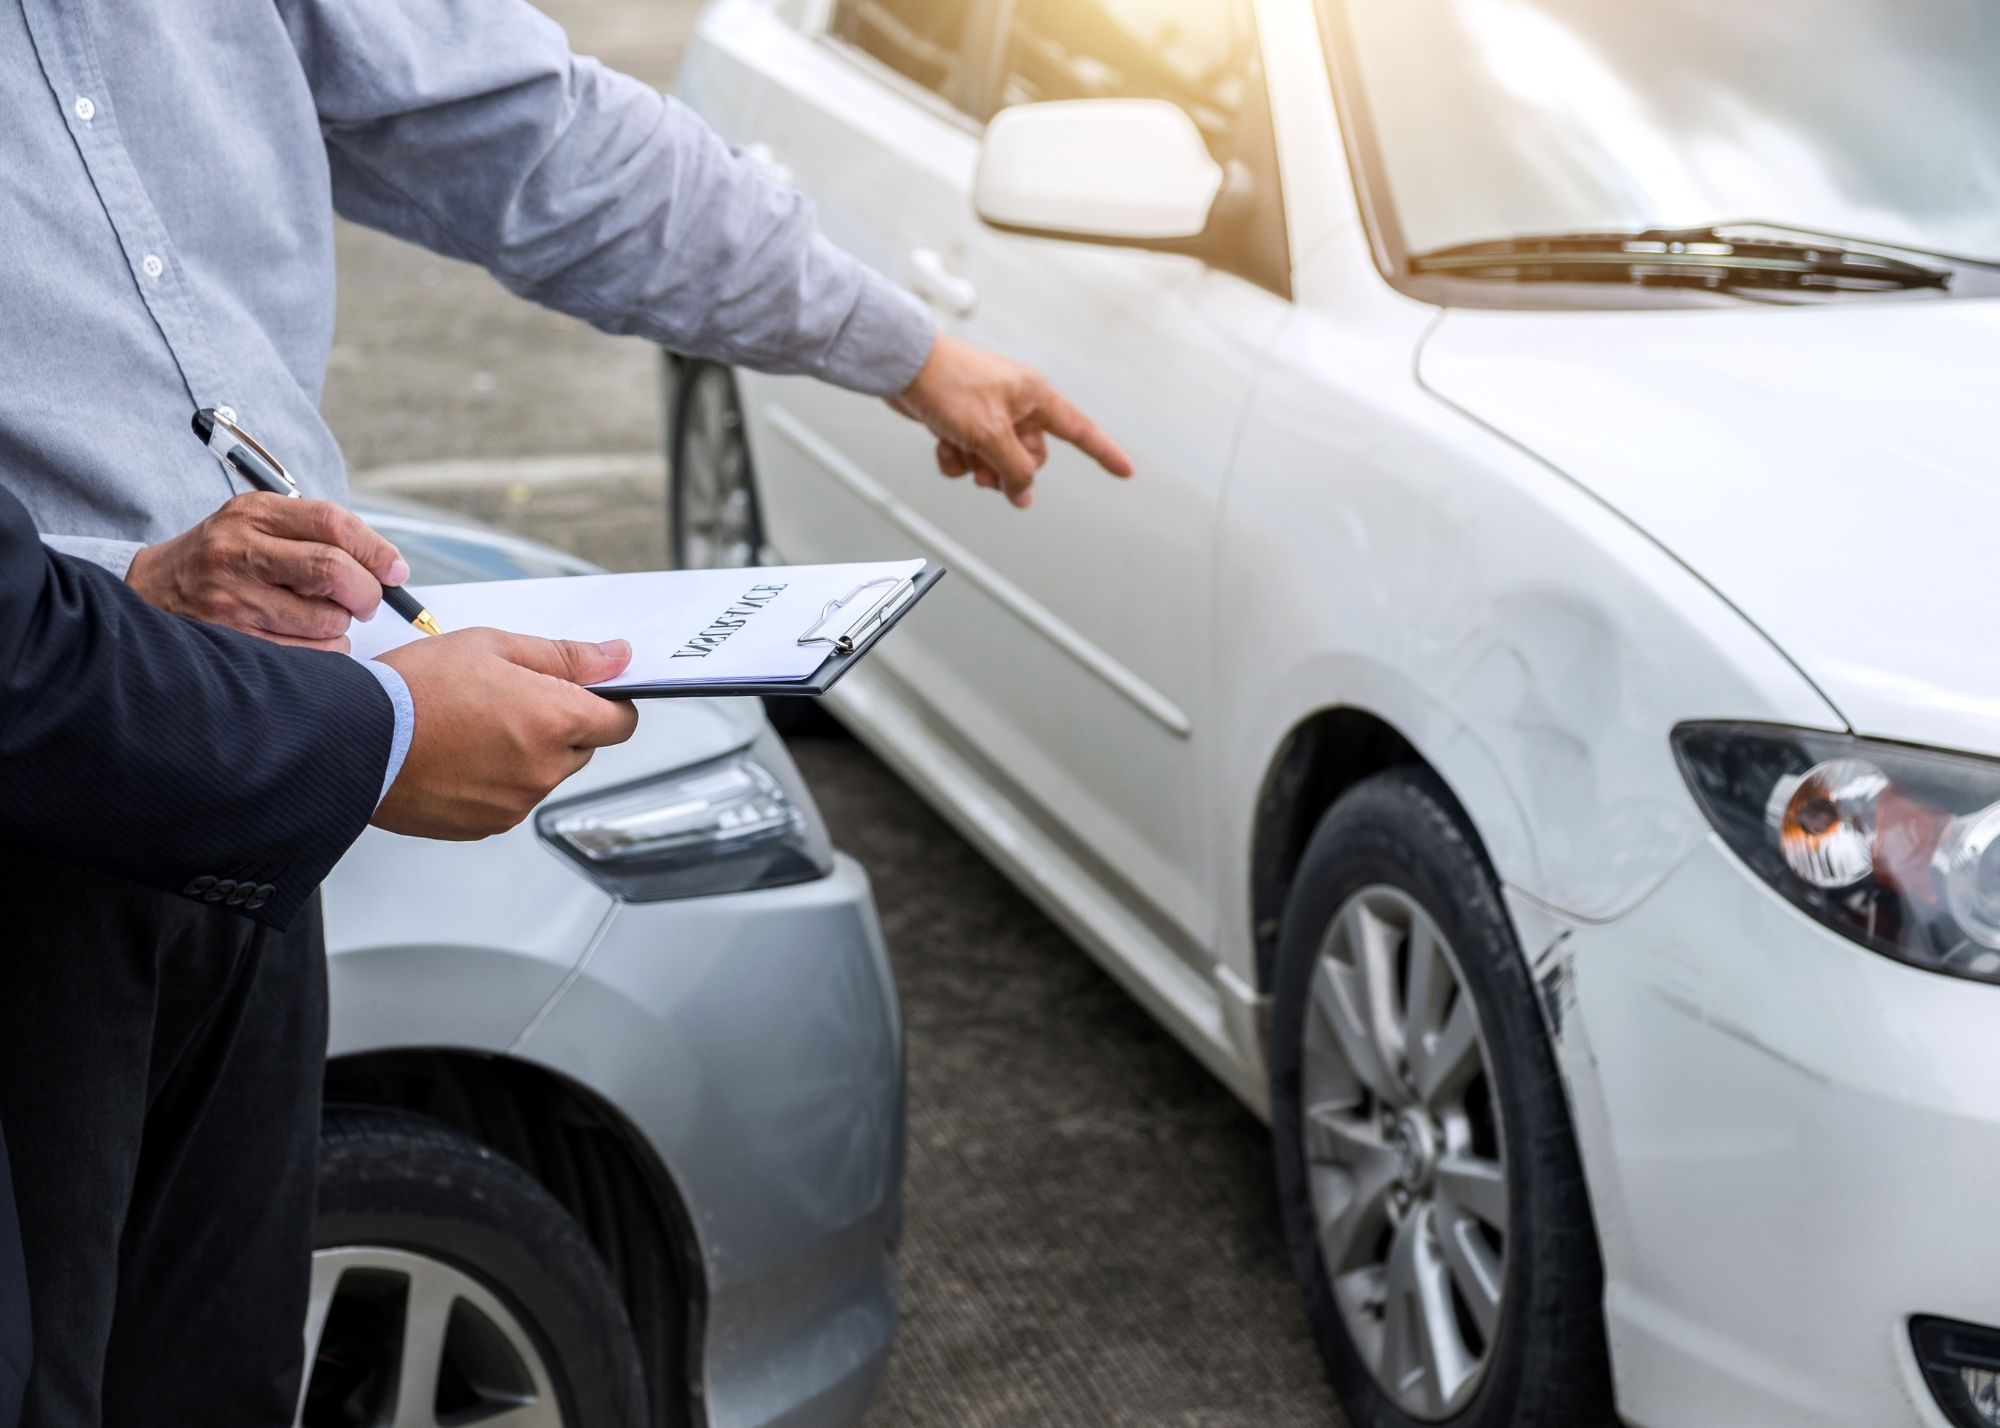 SR22 state car coverage is a type of auto insurance required for high-risk drivers in order to maintain their driving privileges. It is commonly used in St. Petersburg, FL to fulfill legal requirements.